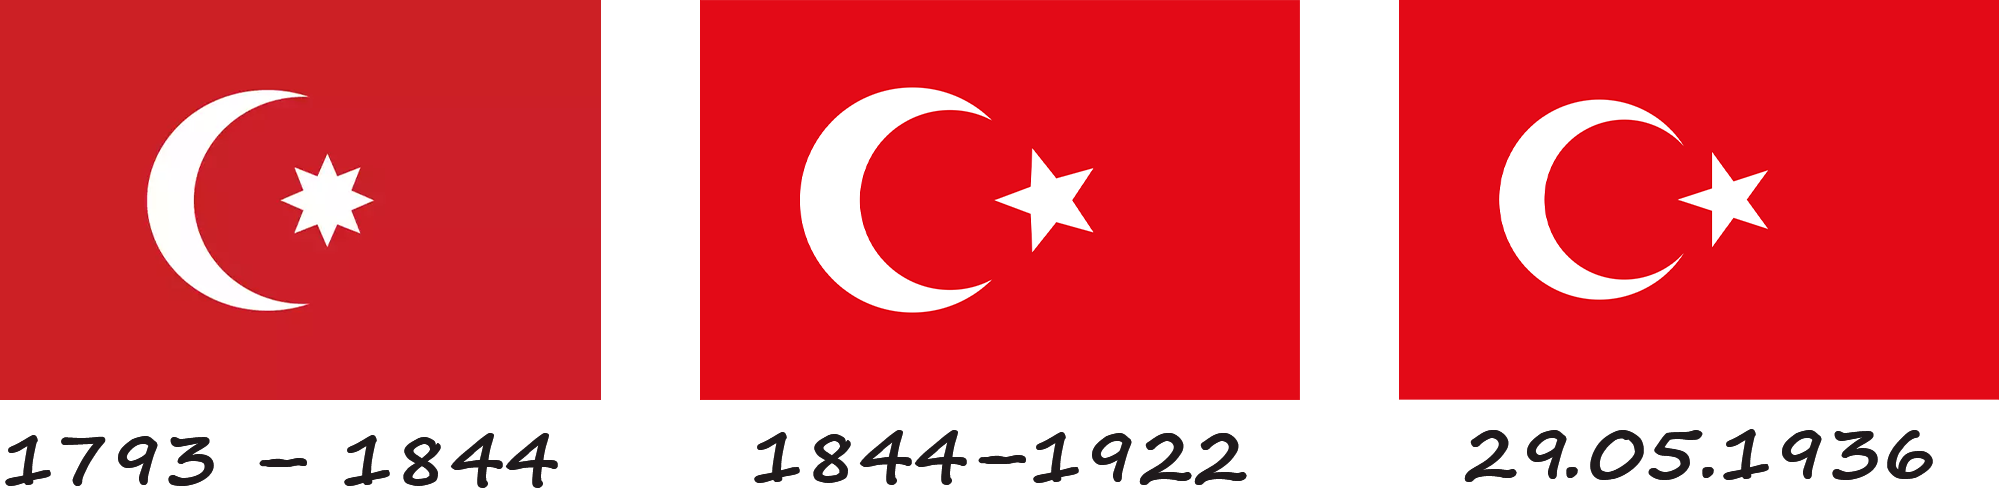 History of the Turkish flag